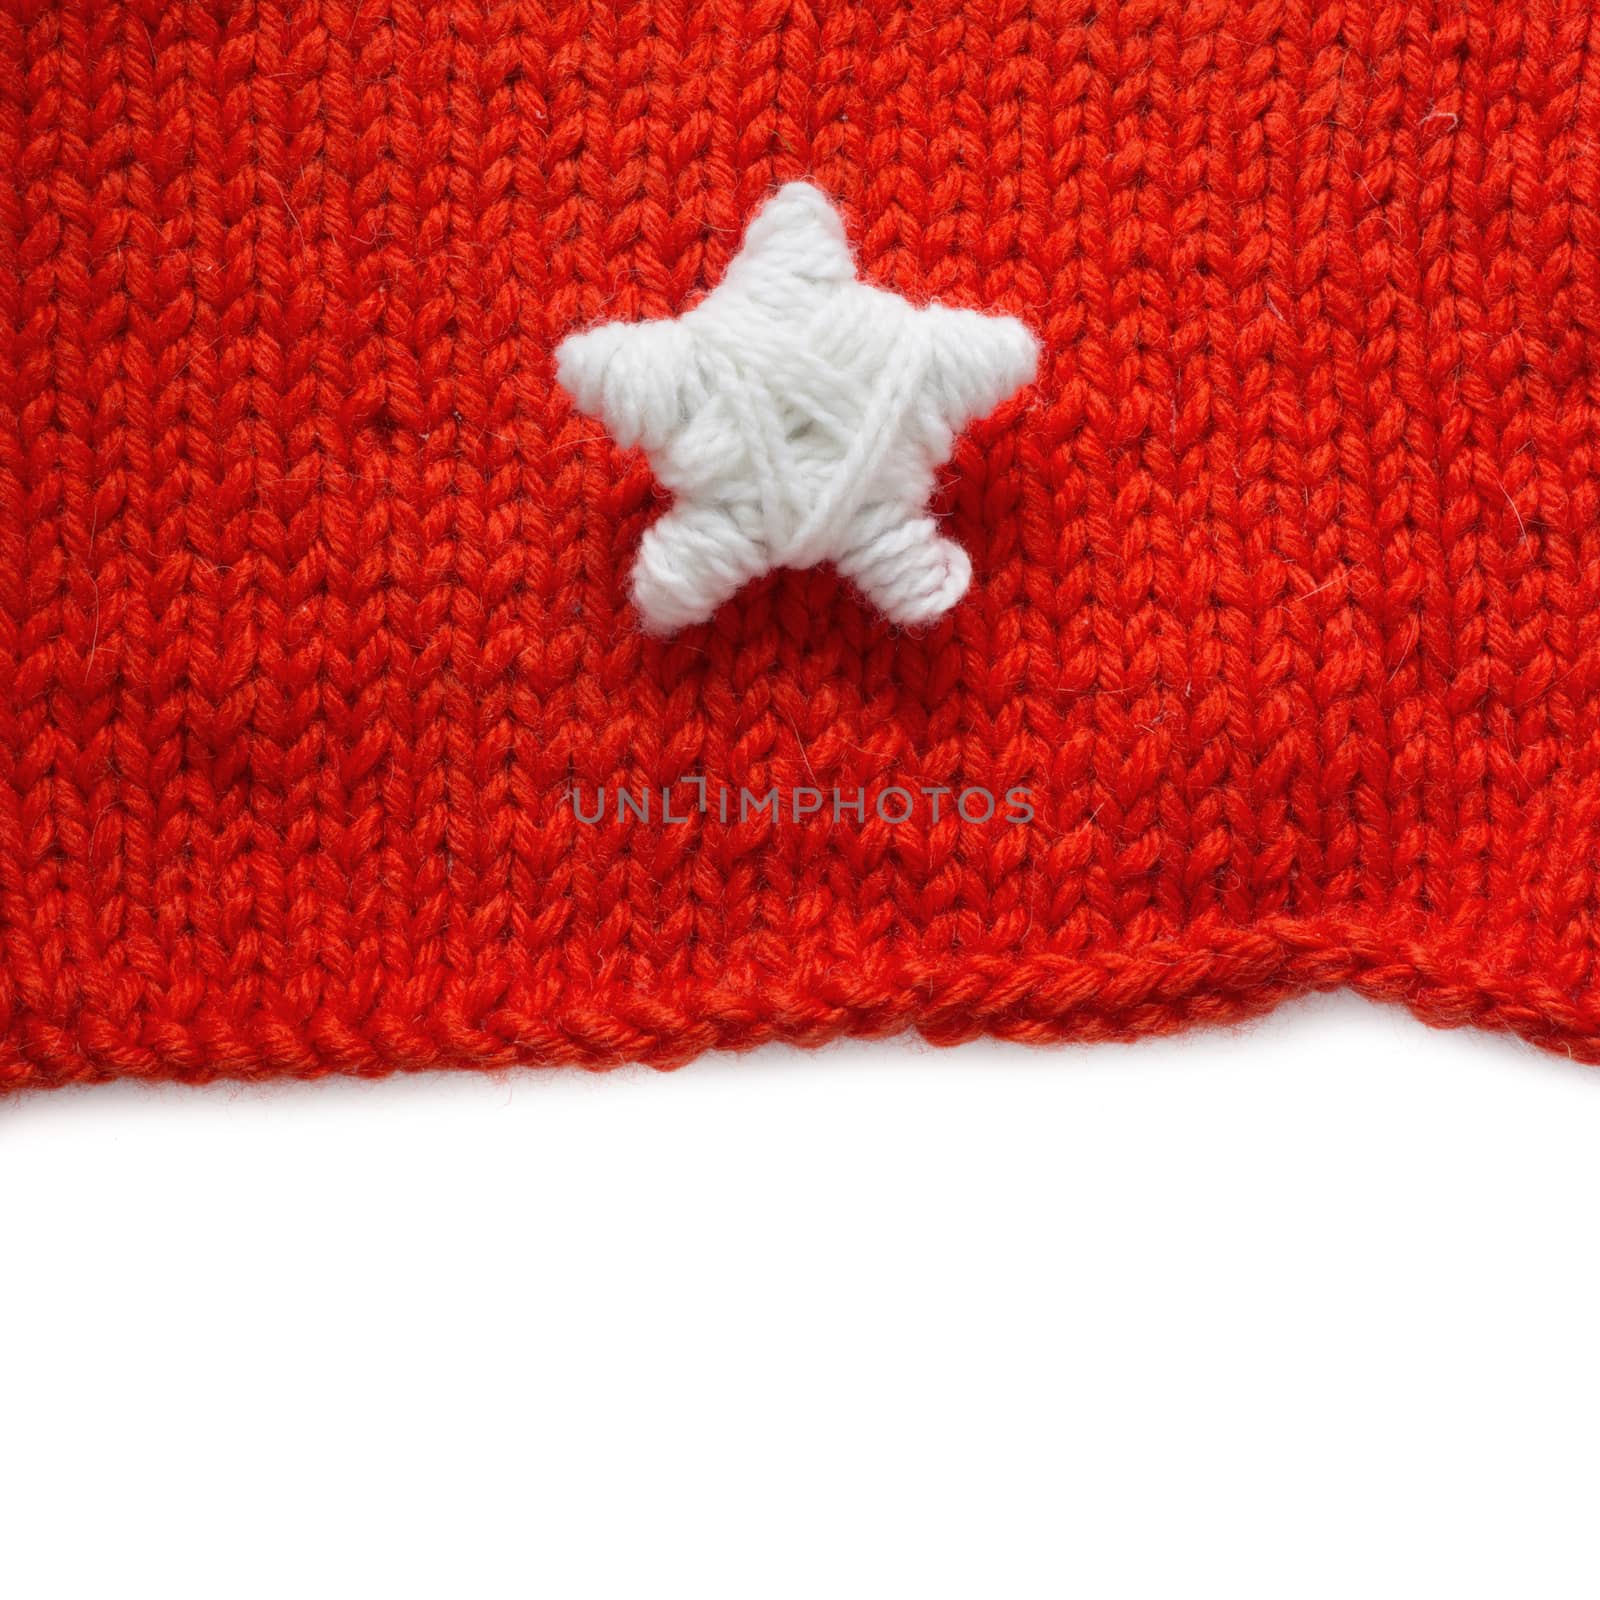 Handmade Christmas Star on red knitted woolen background isolated on white background with copy space for text